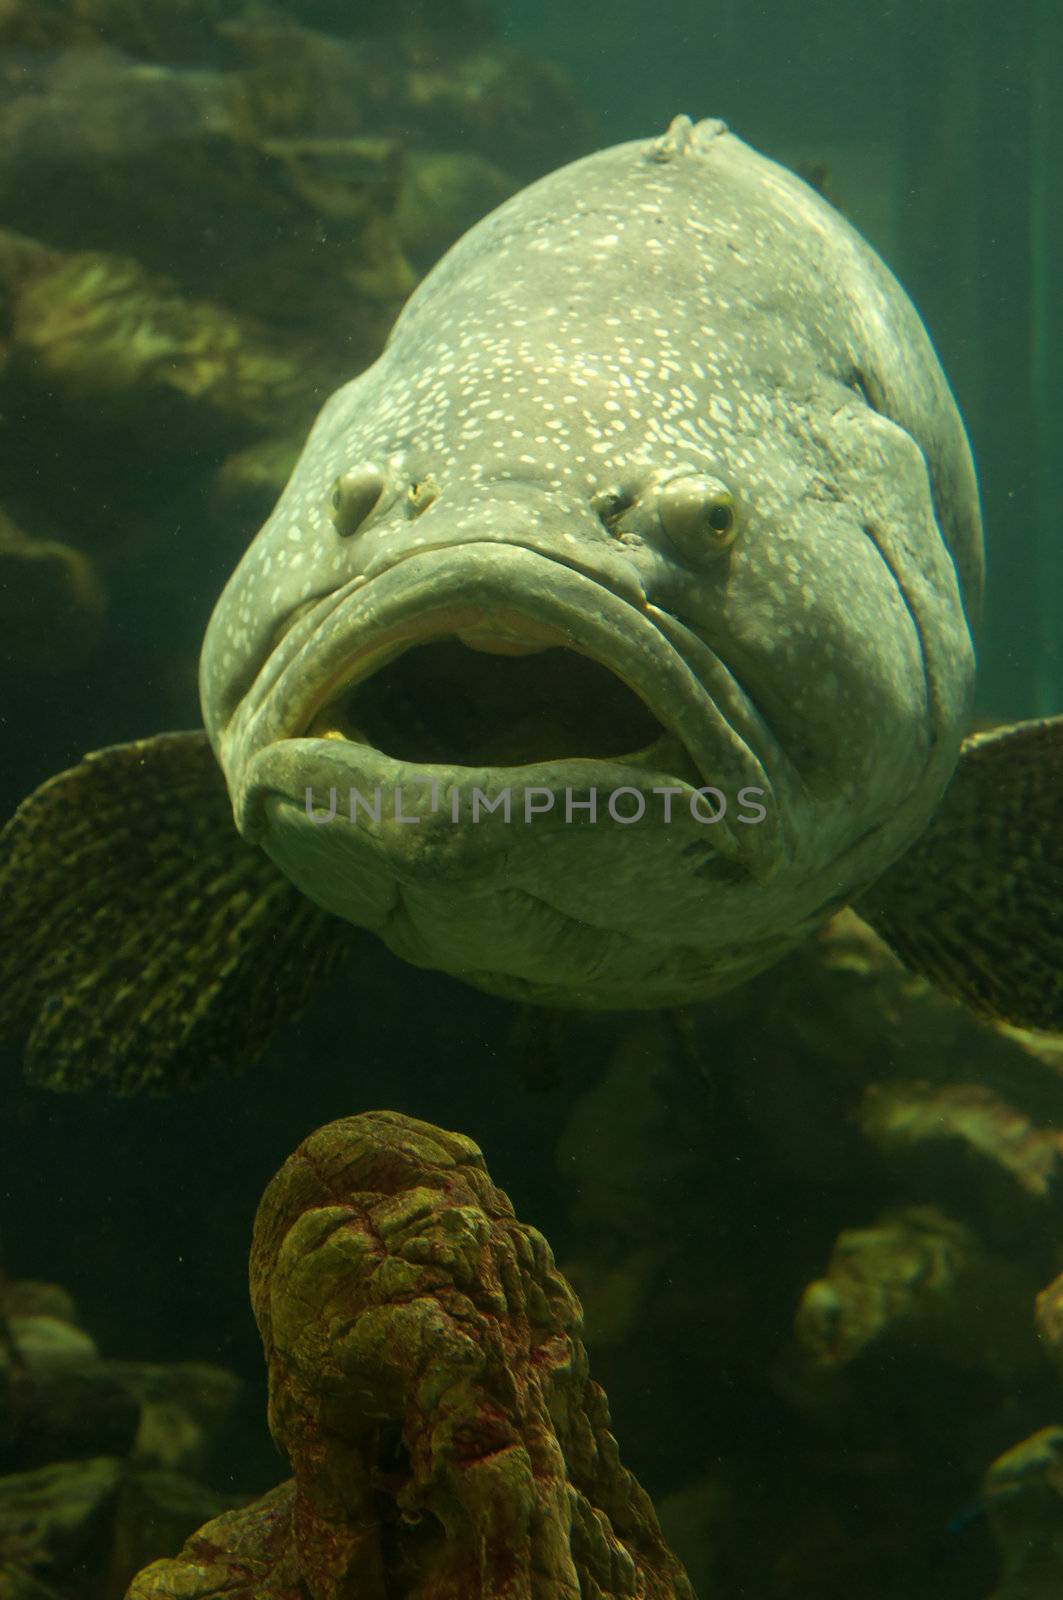 Underwater close up photo of tropical fish